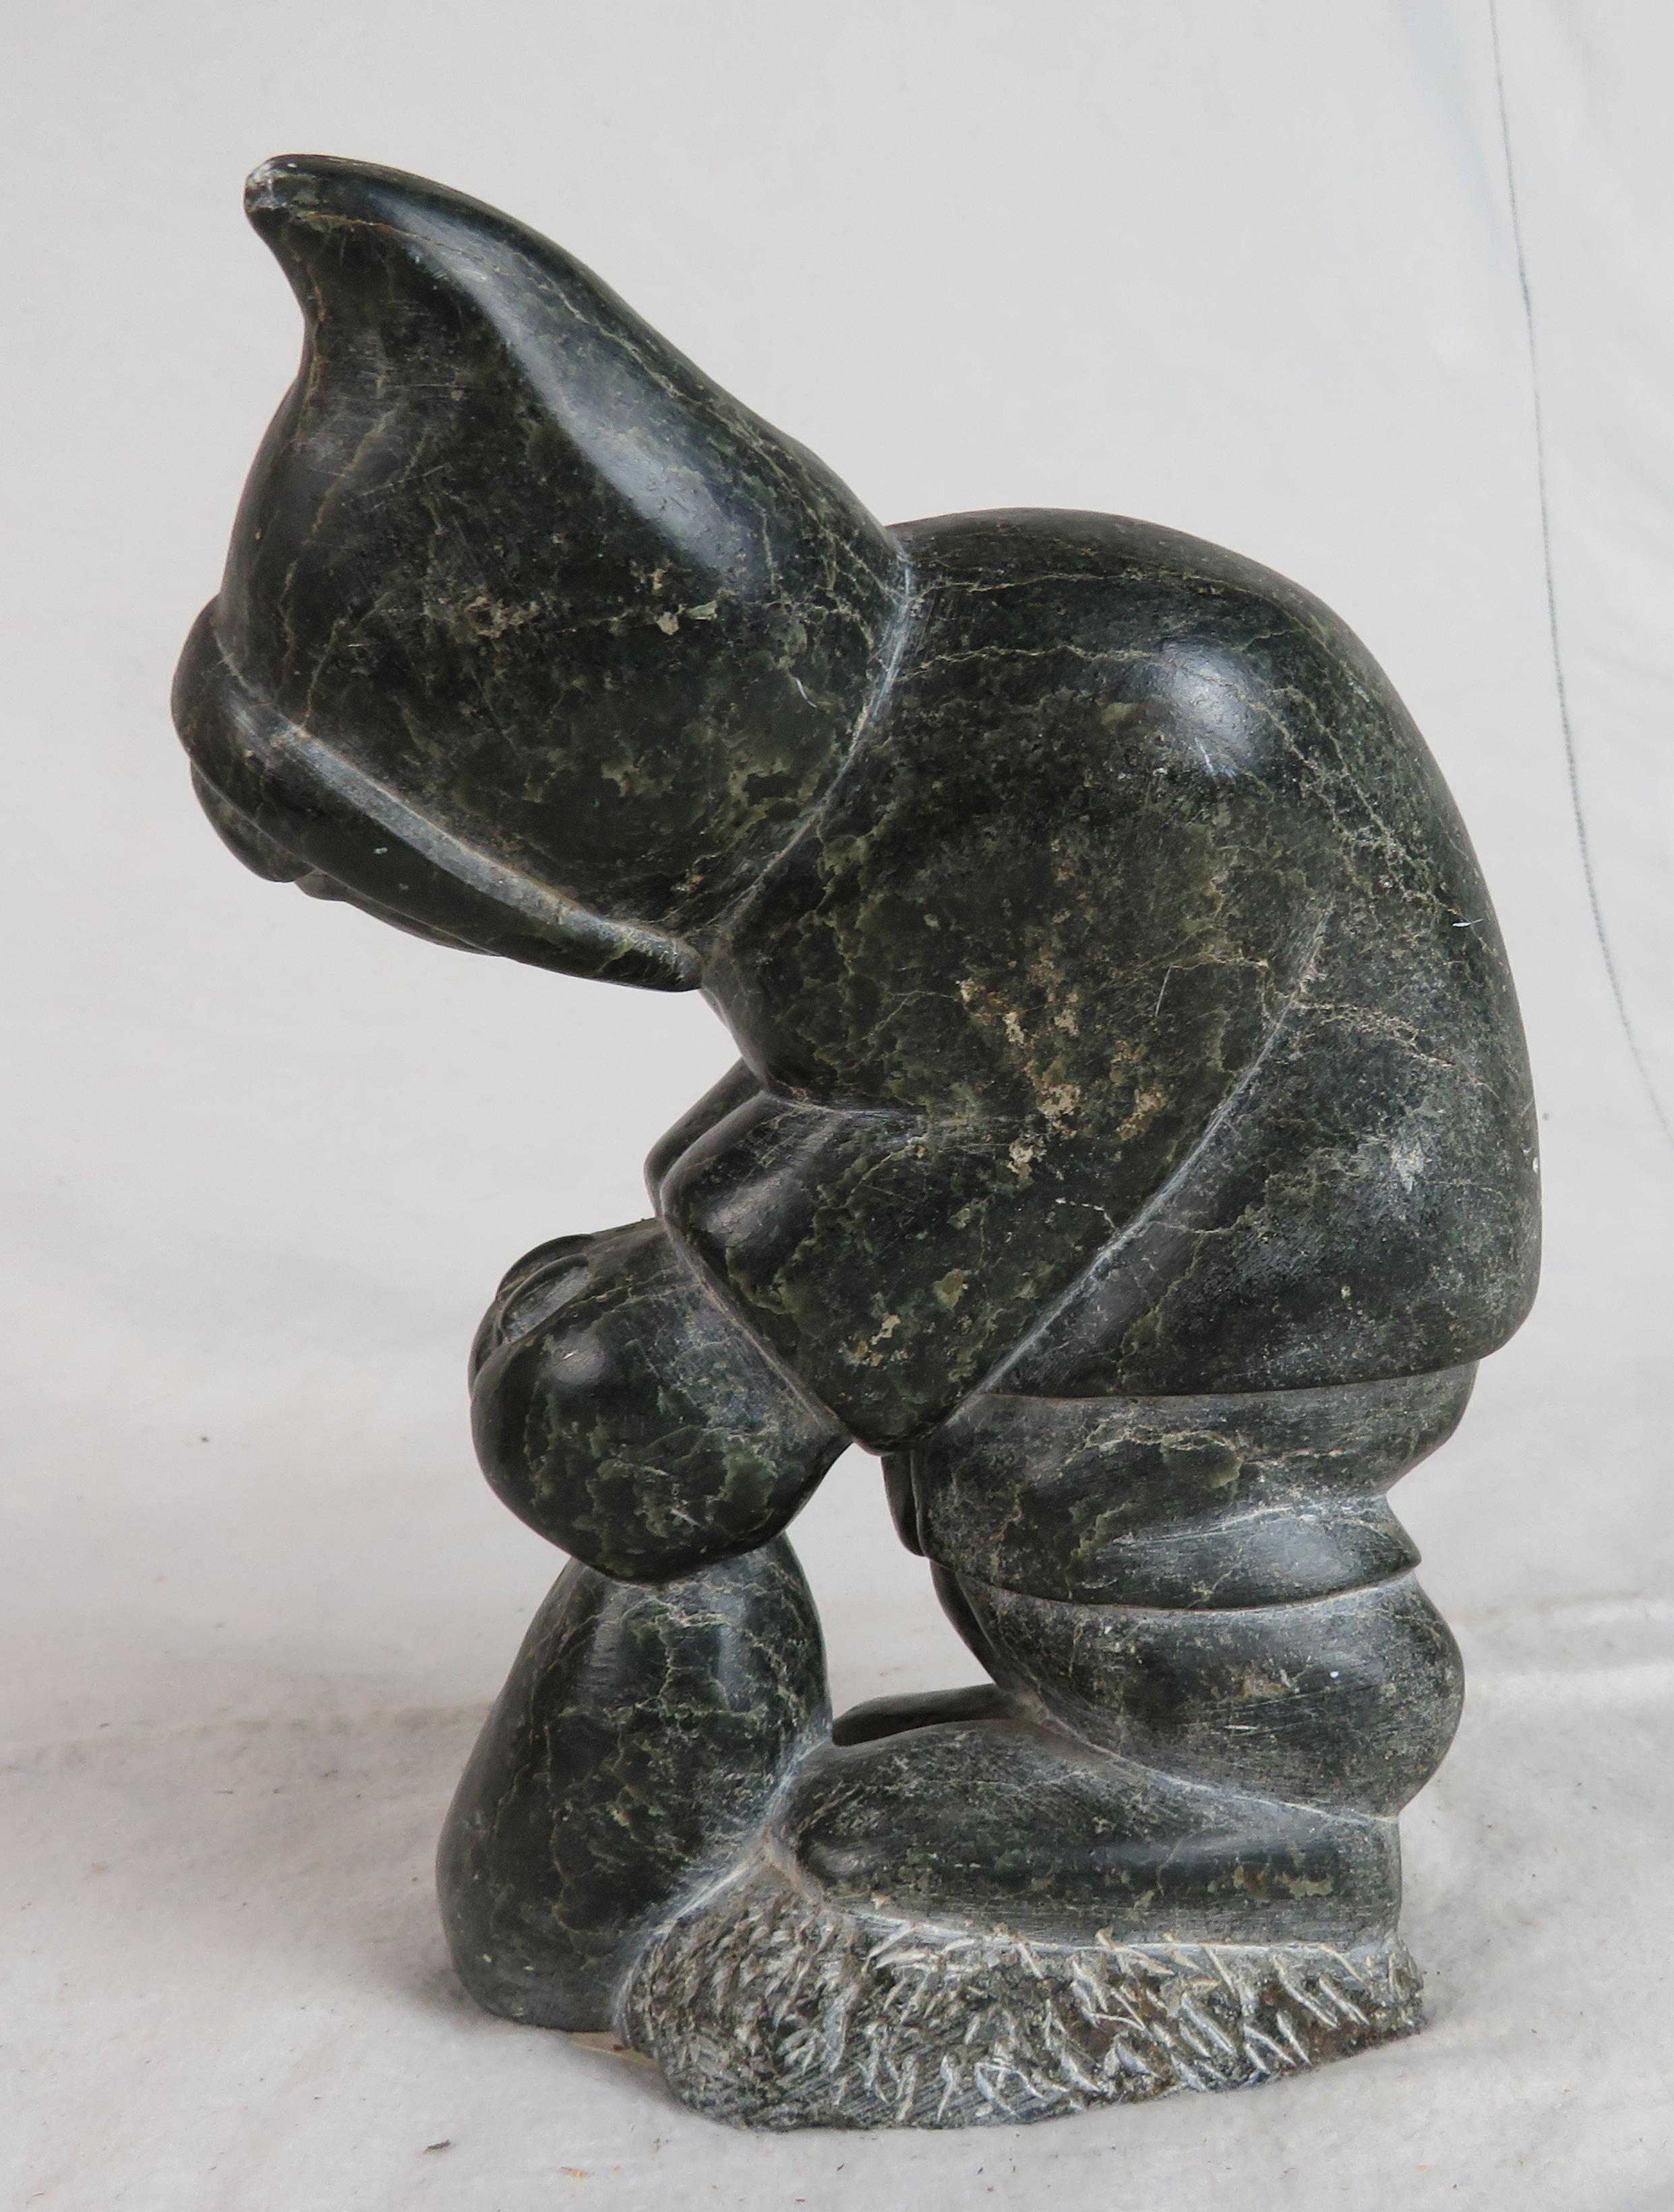 Canadian Carved Soapstone Sculpture of an Inuit Leaning Forward, Holding Bag at Feet For Sale